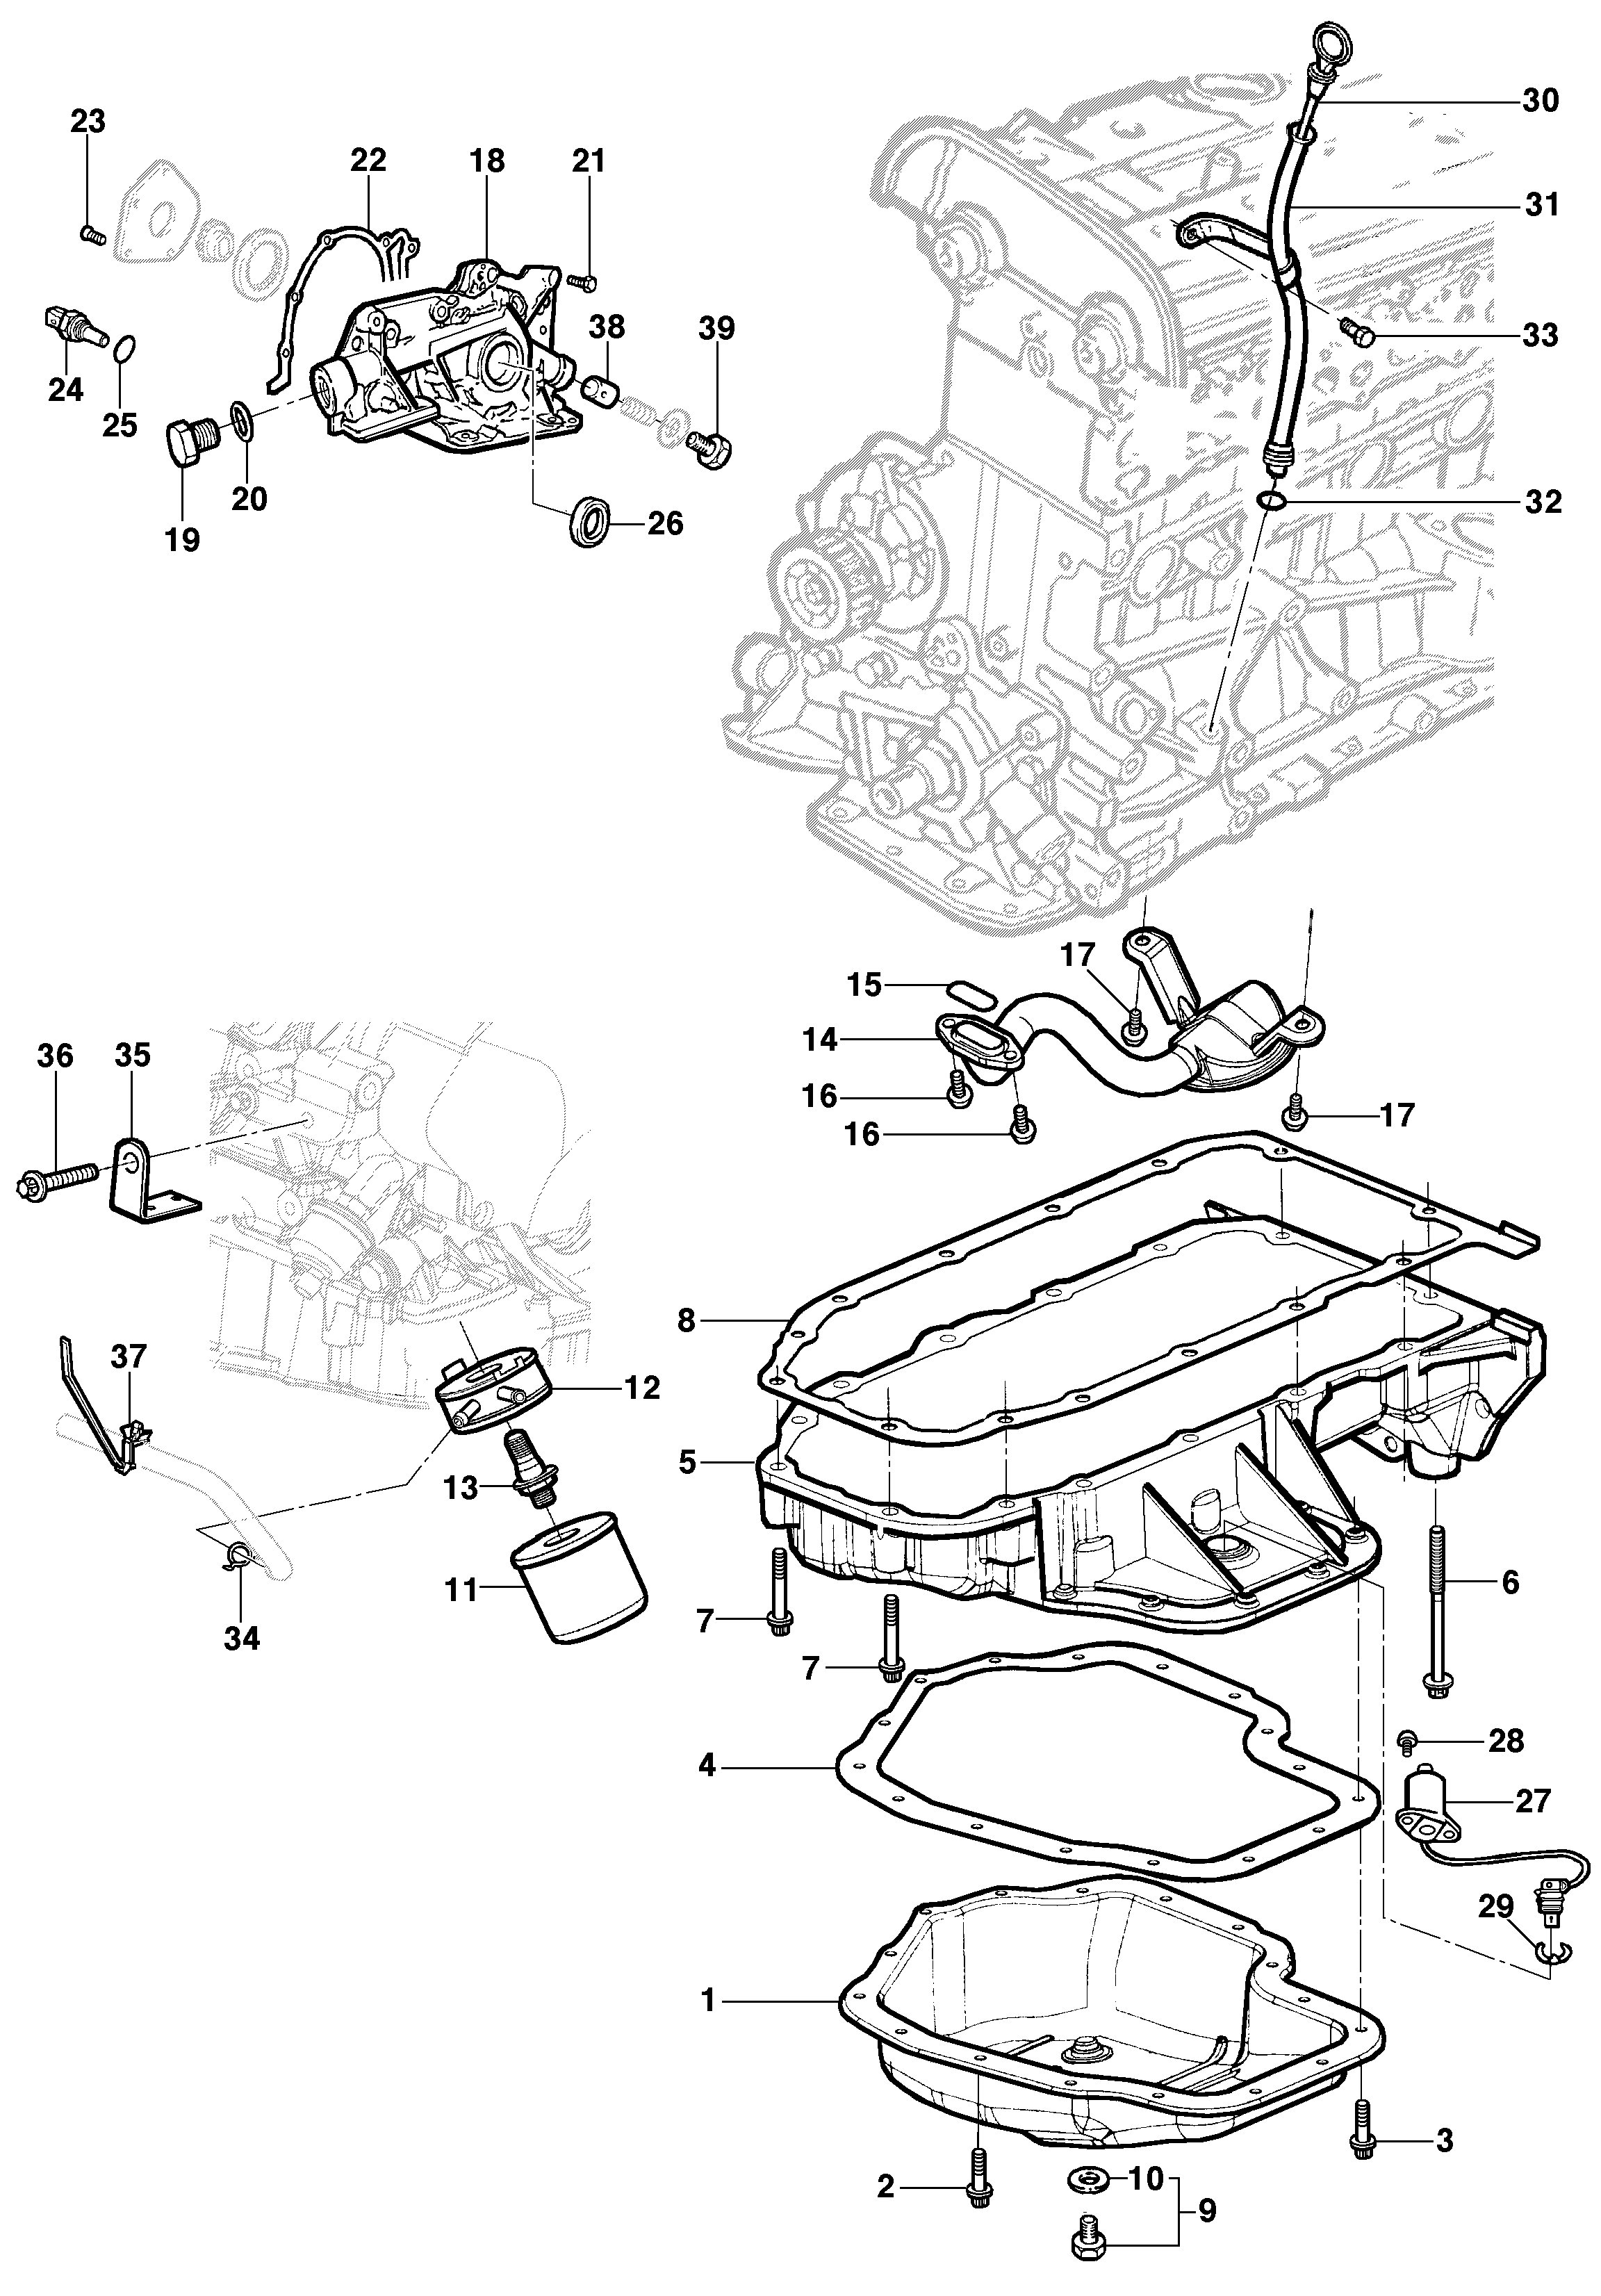 Oil pan and oil pump - 16V engine